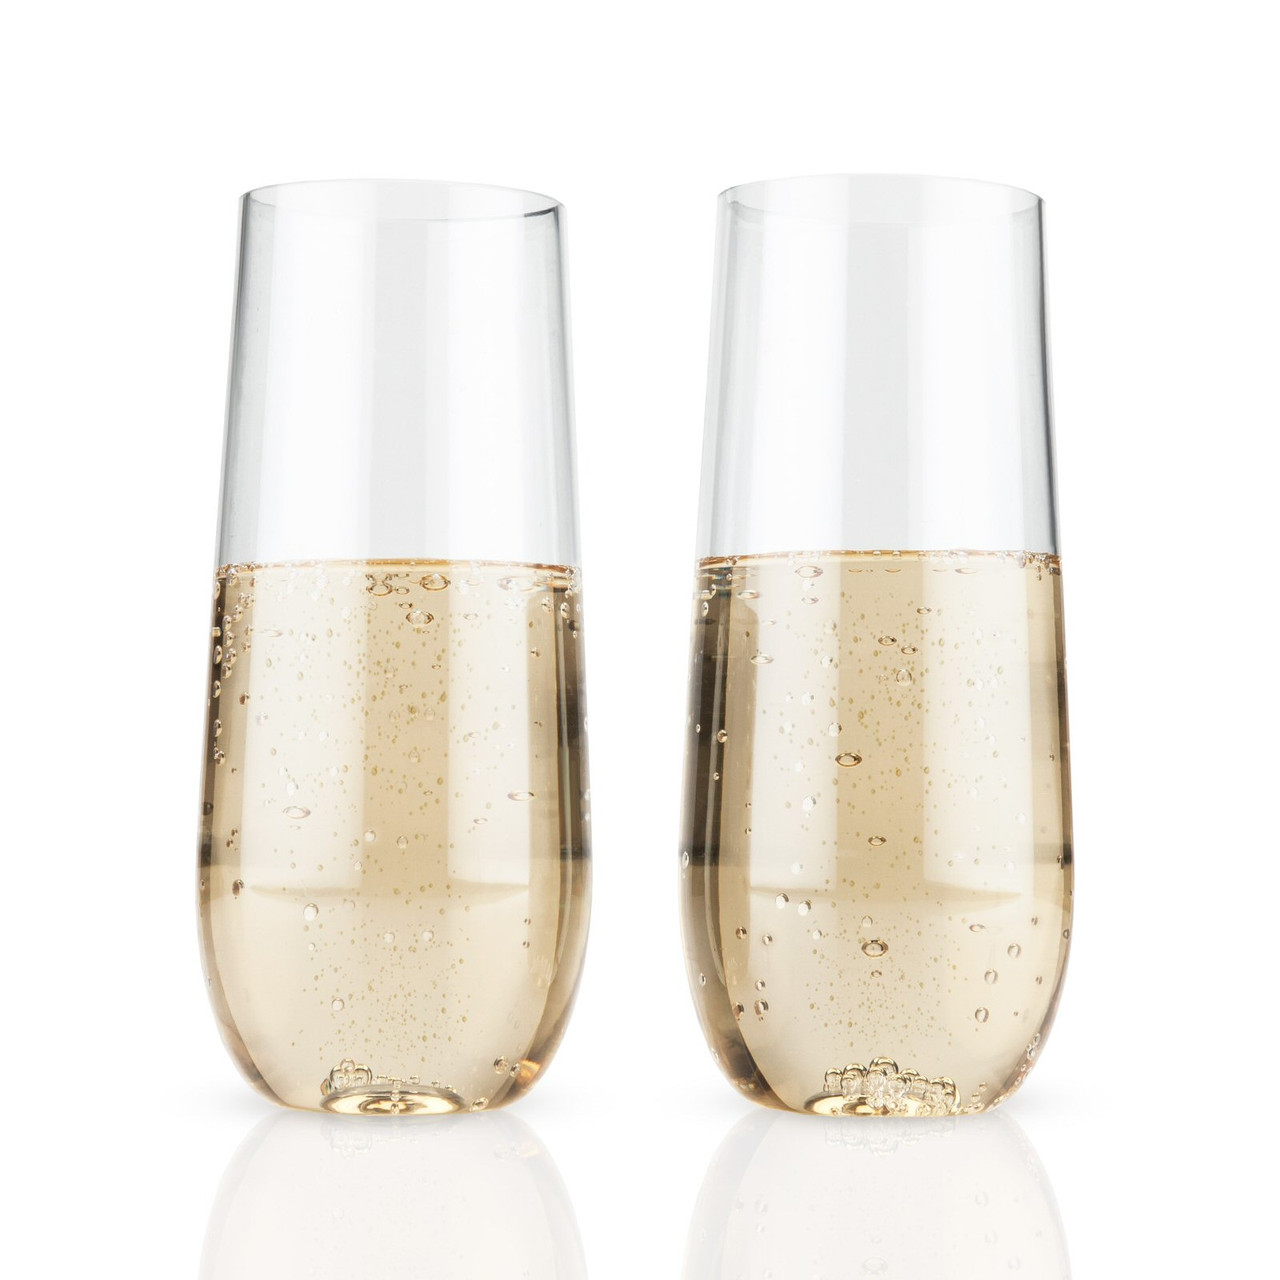 https://cdn11.bigcommerce.com/s-oo0gdojvjo/images/stencil/1280x1280/products/68542/100685/flexi-stemless-champagne-flutes-by-true-set-of-2__81169.1683777504.jpg?c=2